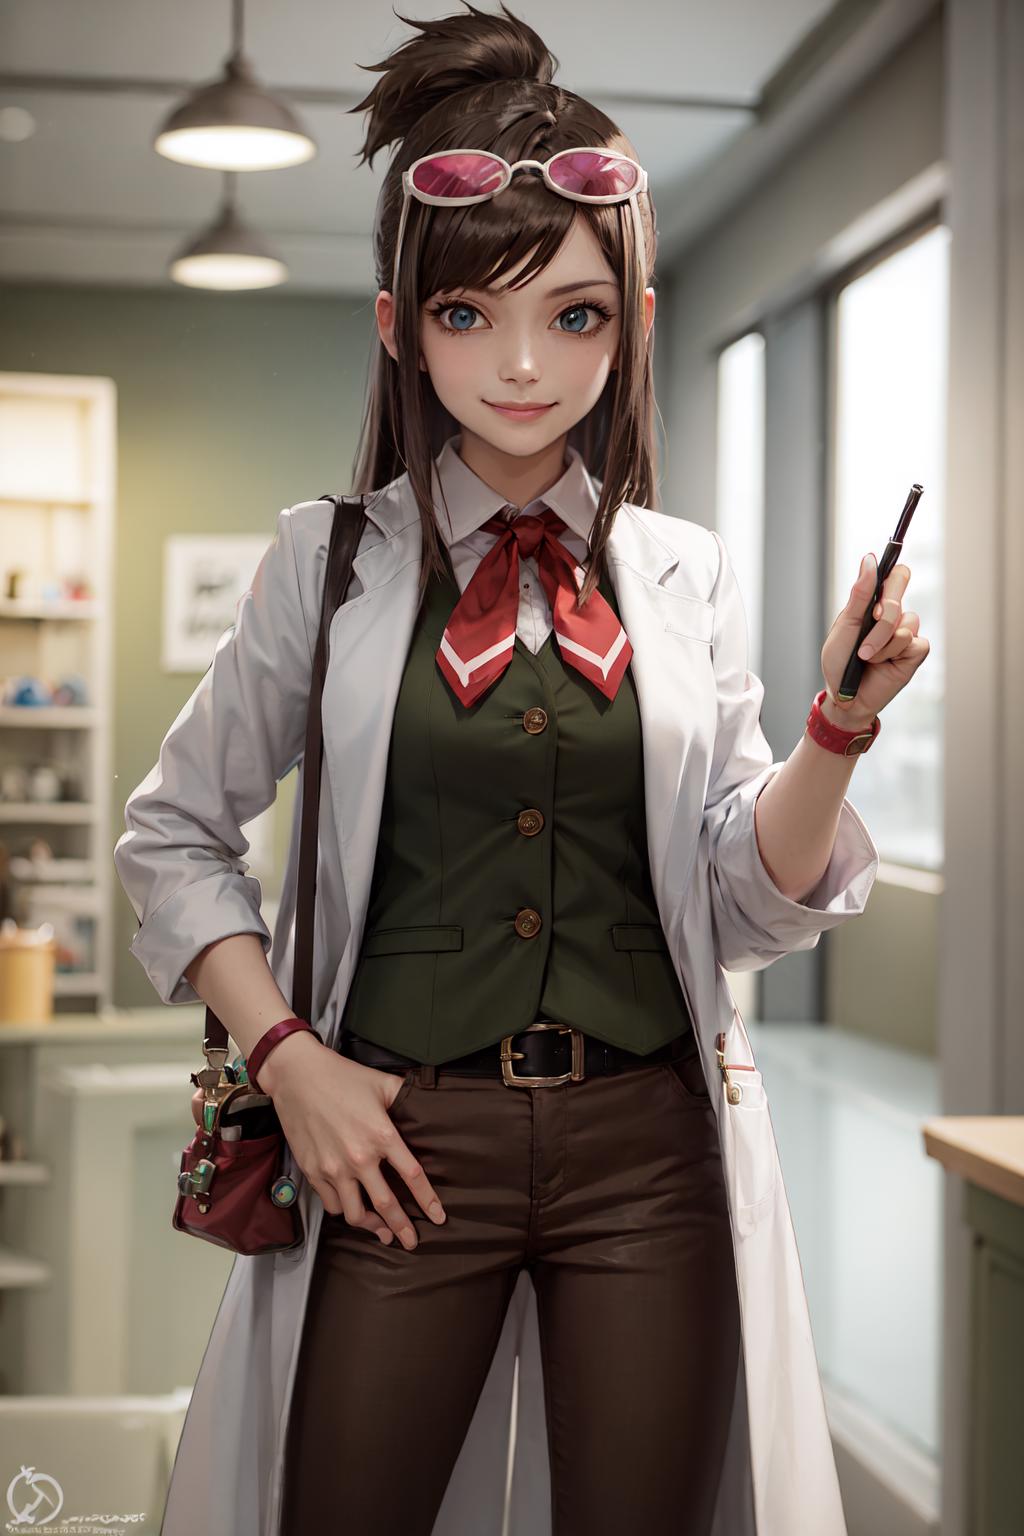 Ema Skye | Ace Attorney image by justTNP